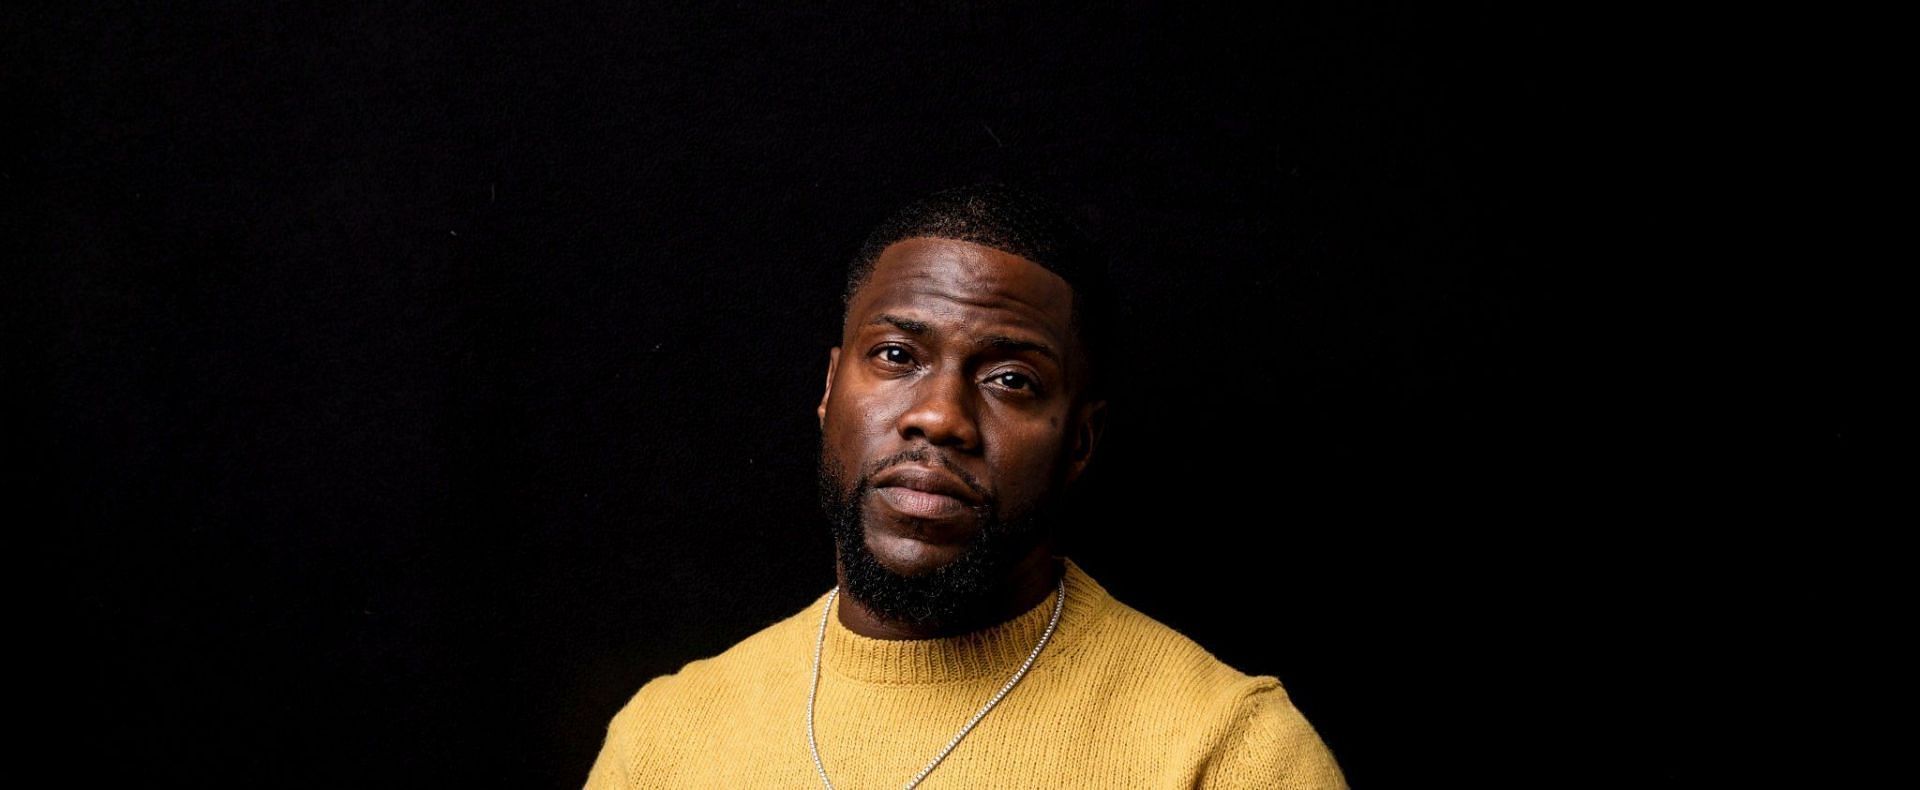 Why is Kevin Hart trending? Hilarious memes erupt on Twitter as actor's  funny serious pictures go viral